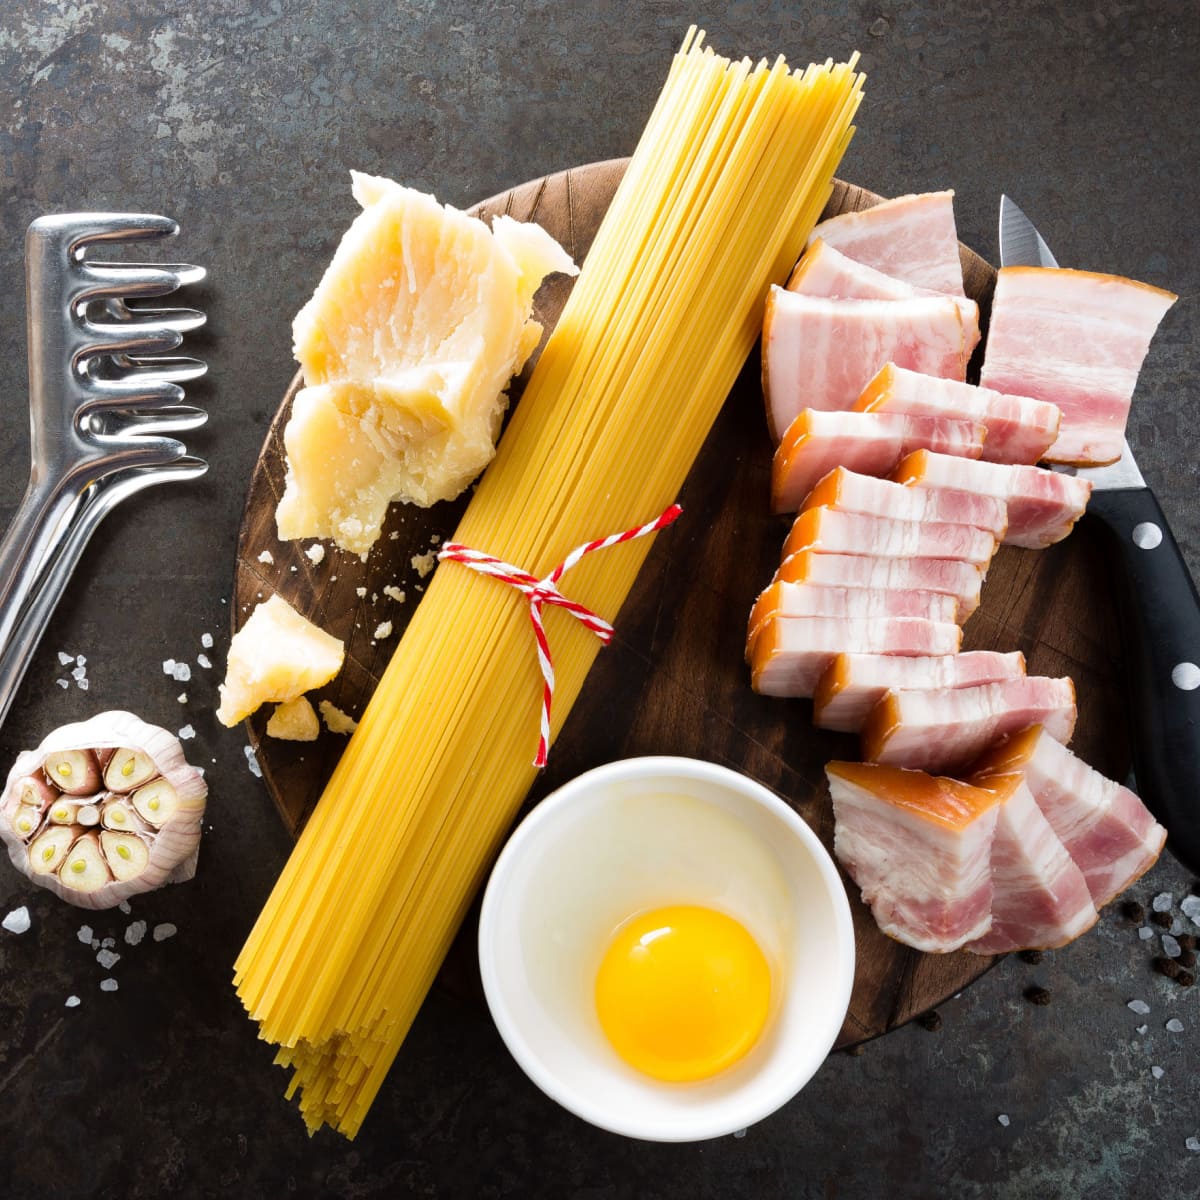 Pasta noodles, egg yolk, parmesan cheese and sliced bacon on a wooden board. 